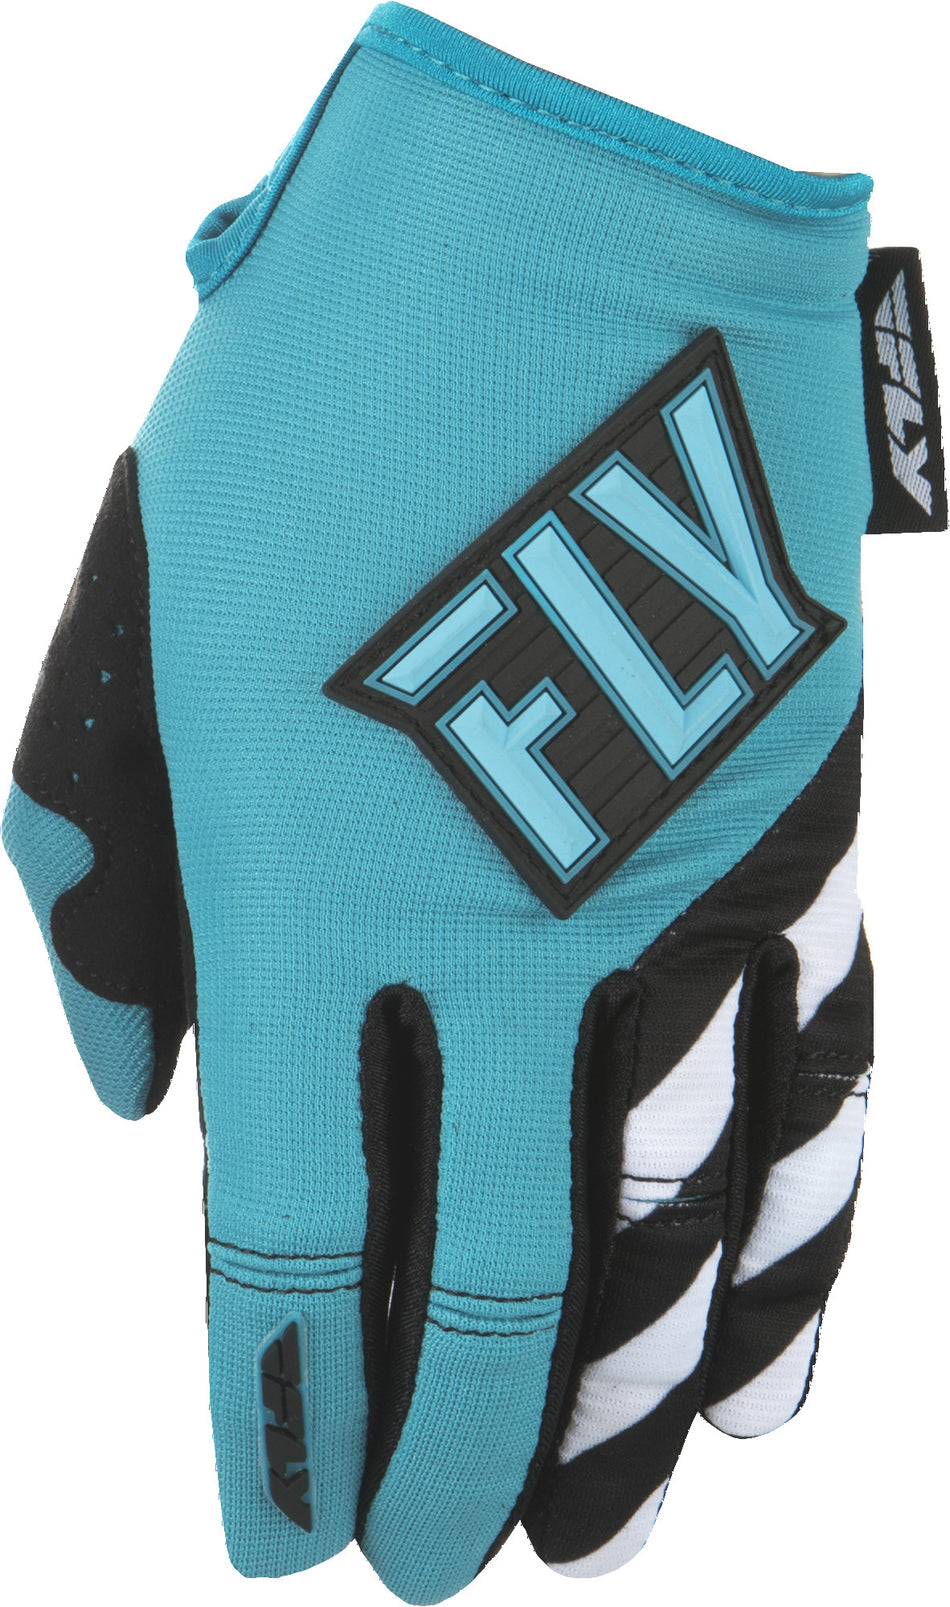 FLY RACING Kinetic Women's Gloves Blue/Teal M 371-61107